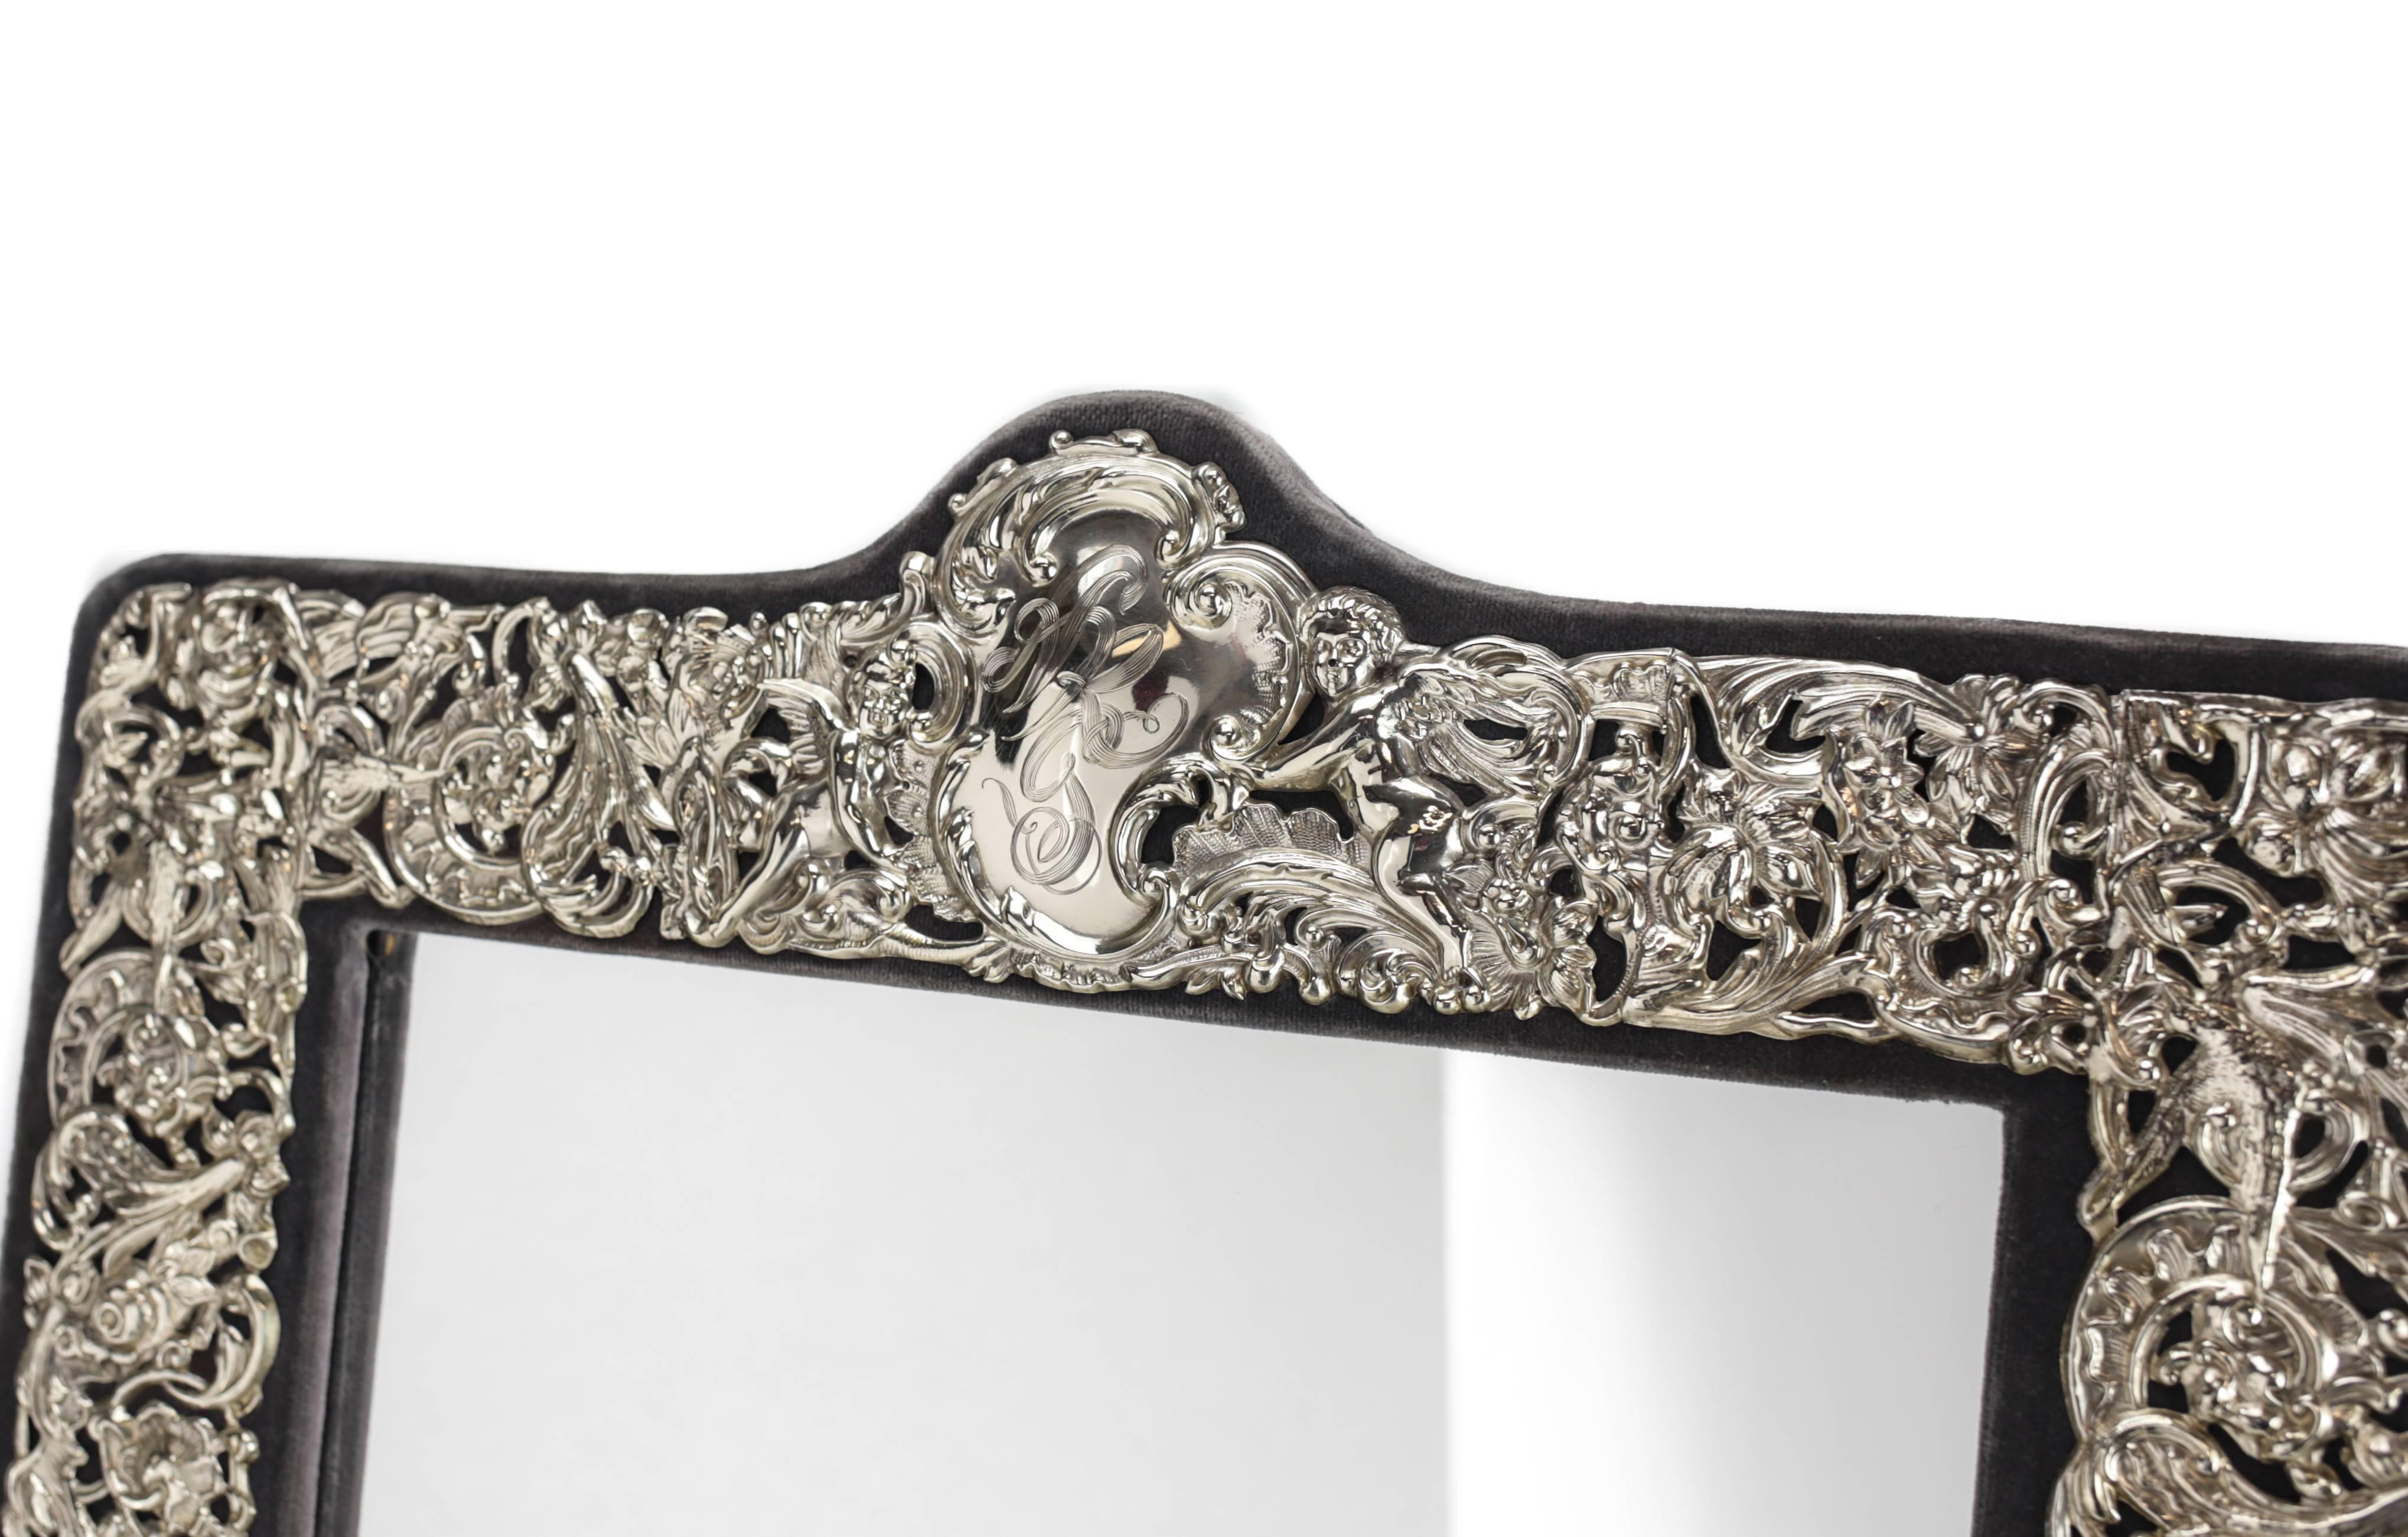 A large American table mirror with an ornate sterling silver mounted border depicting a vine and floral arrangement with two winged cherub’s center top, set on a grey velvet back with easel back. Late 19th or early 20th century.

Lower right